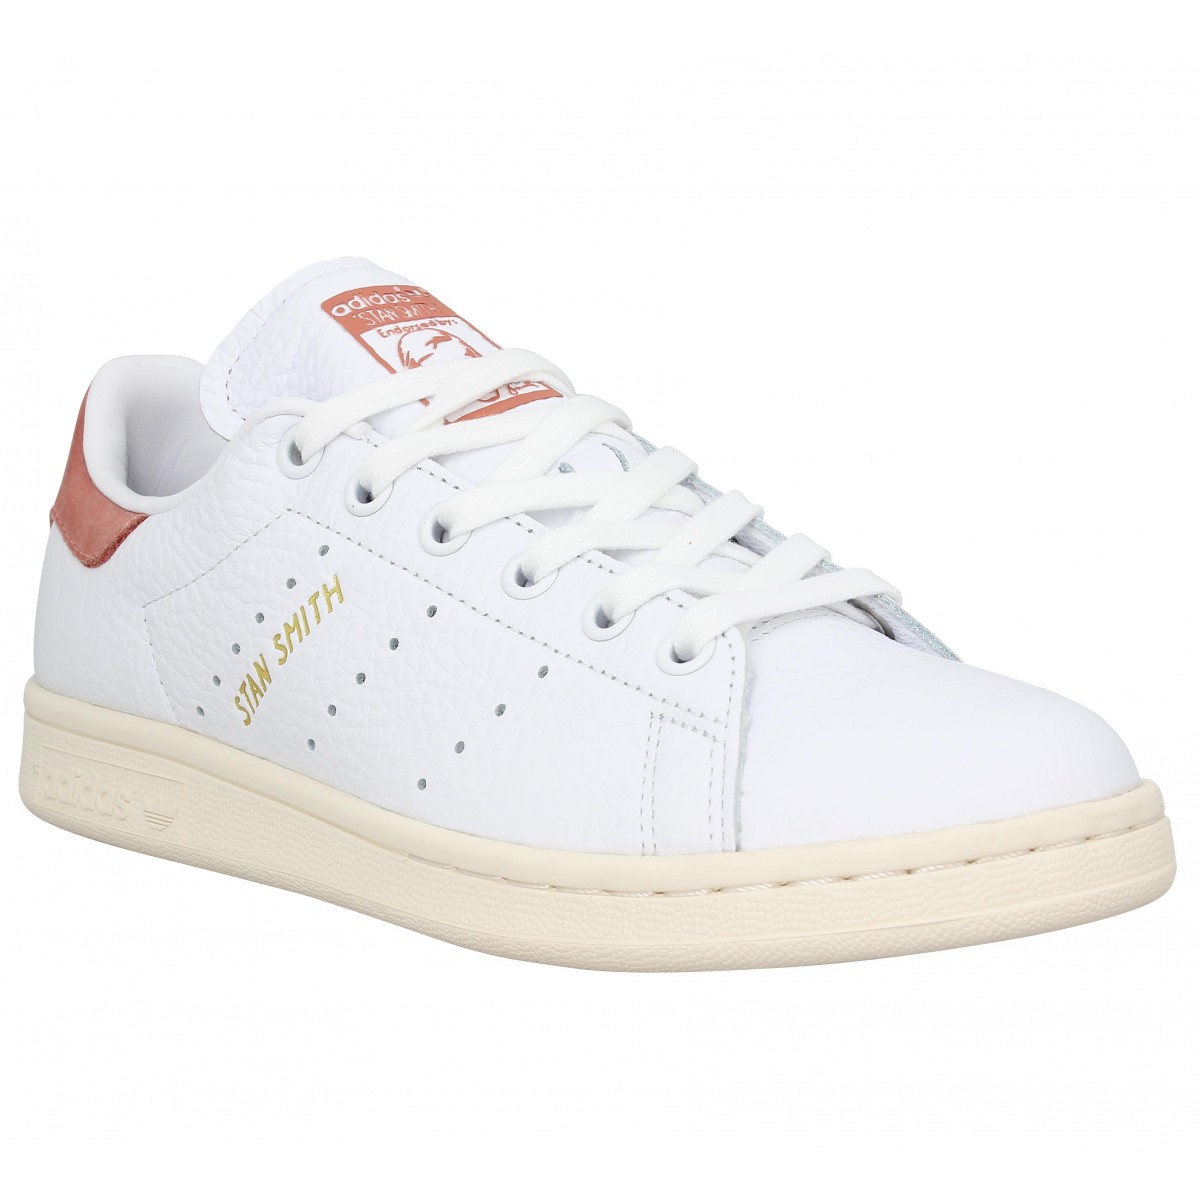 stan smith homme rose